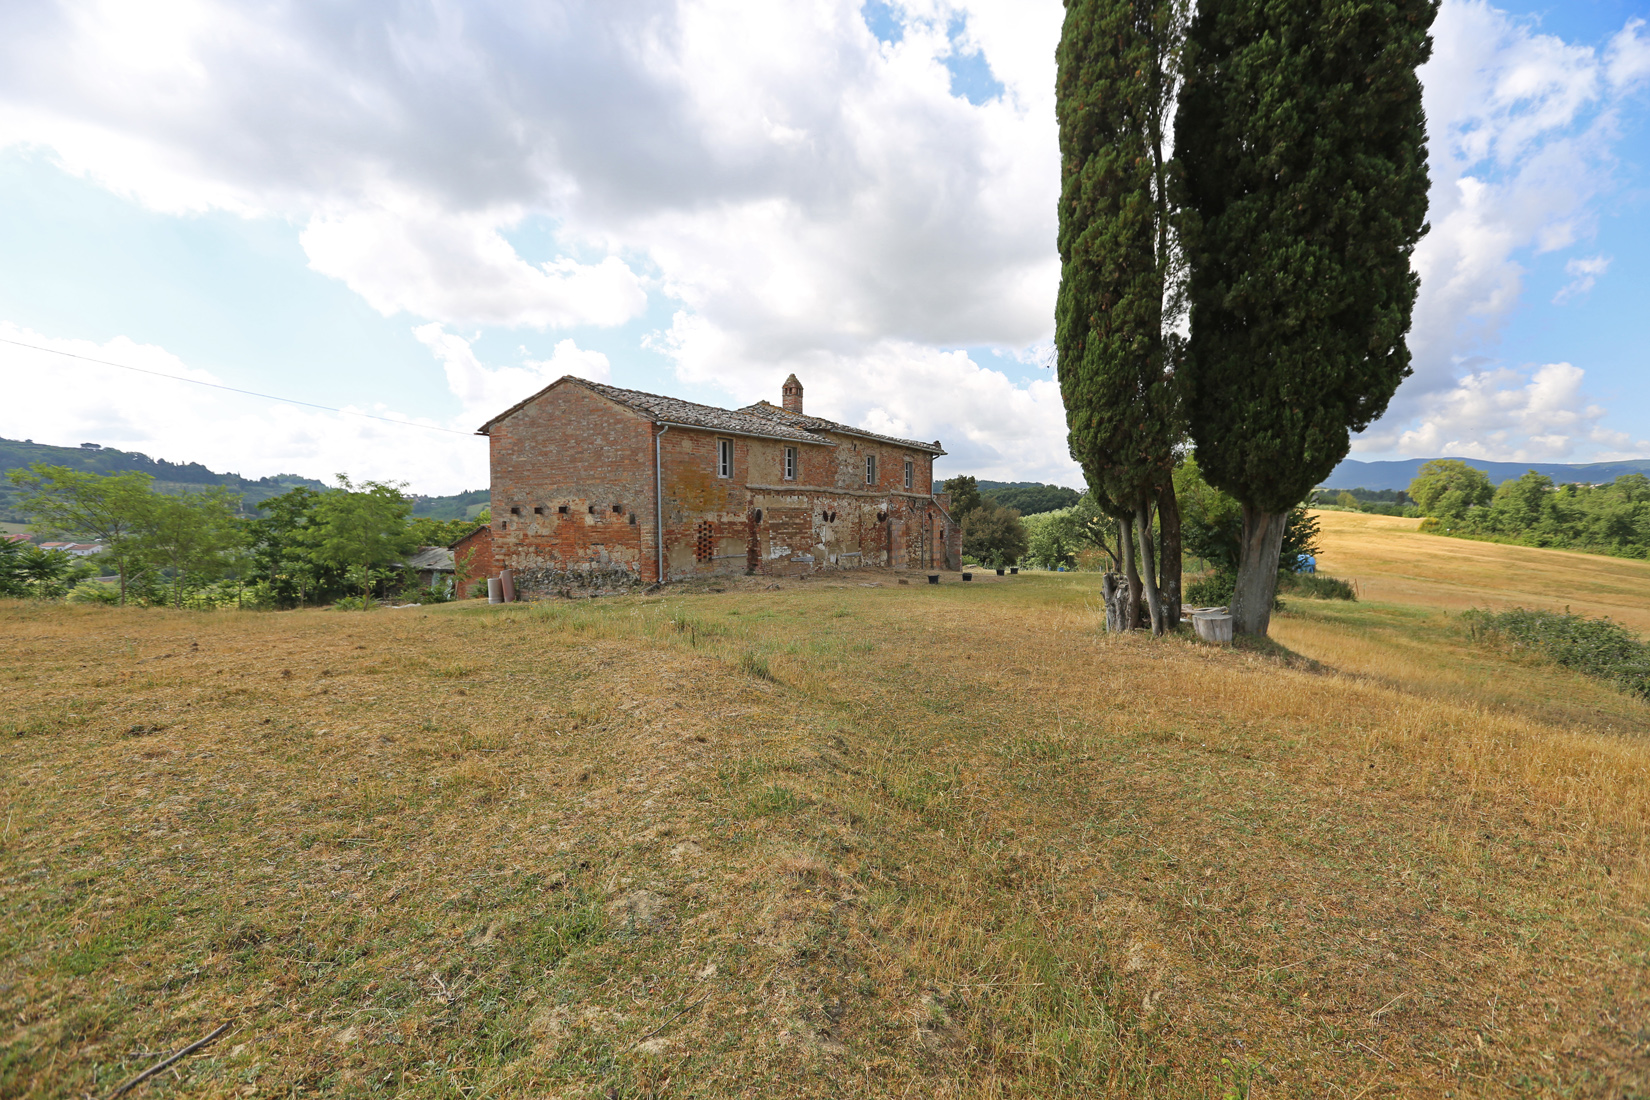 Regulation for the change of use of rural properties: the interview to the Surveyor Stefano Rocchini